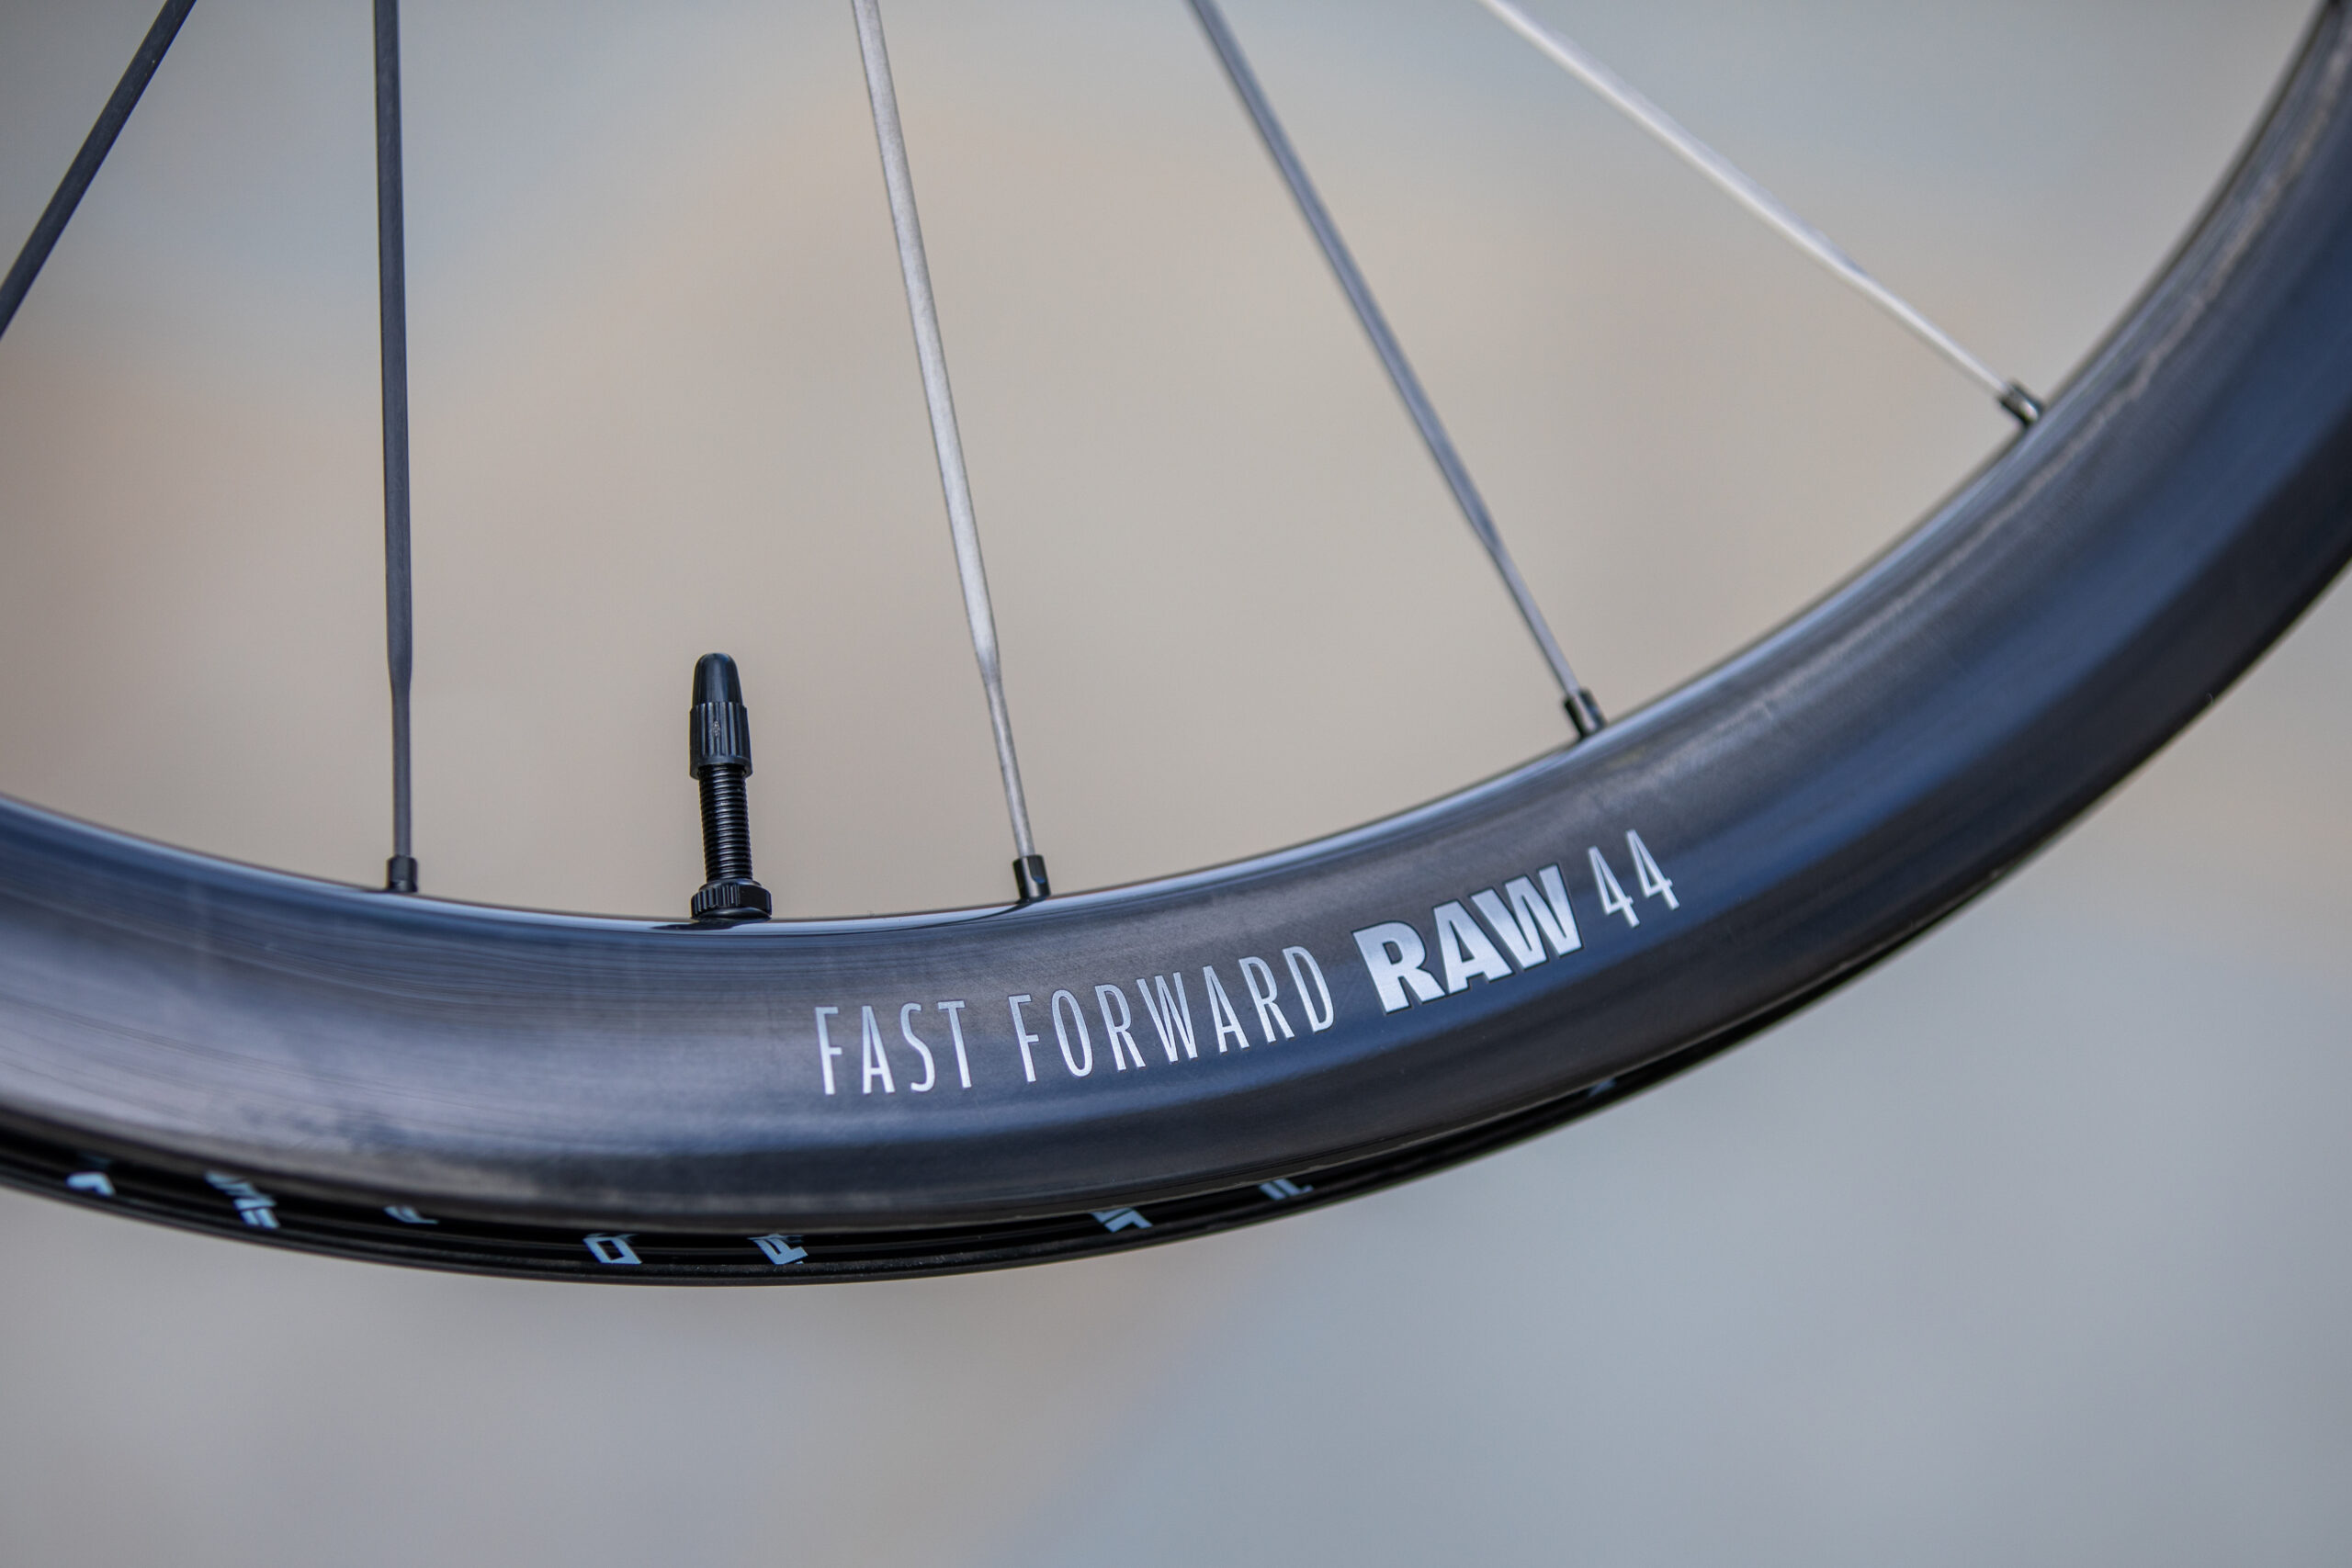 First Look | New FFWD Raw wheels use carbon spokes and CeramicSpeed bearings to save weight and roll faster